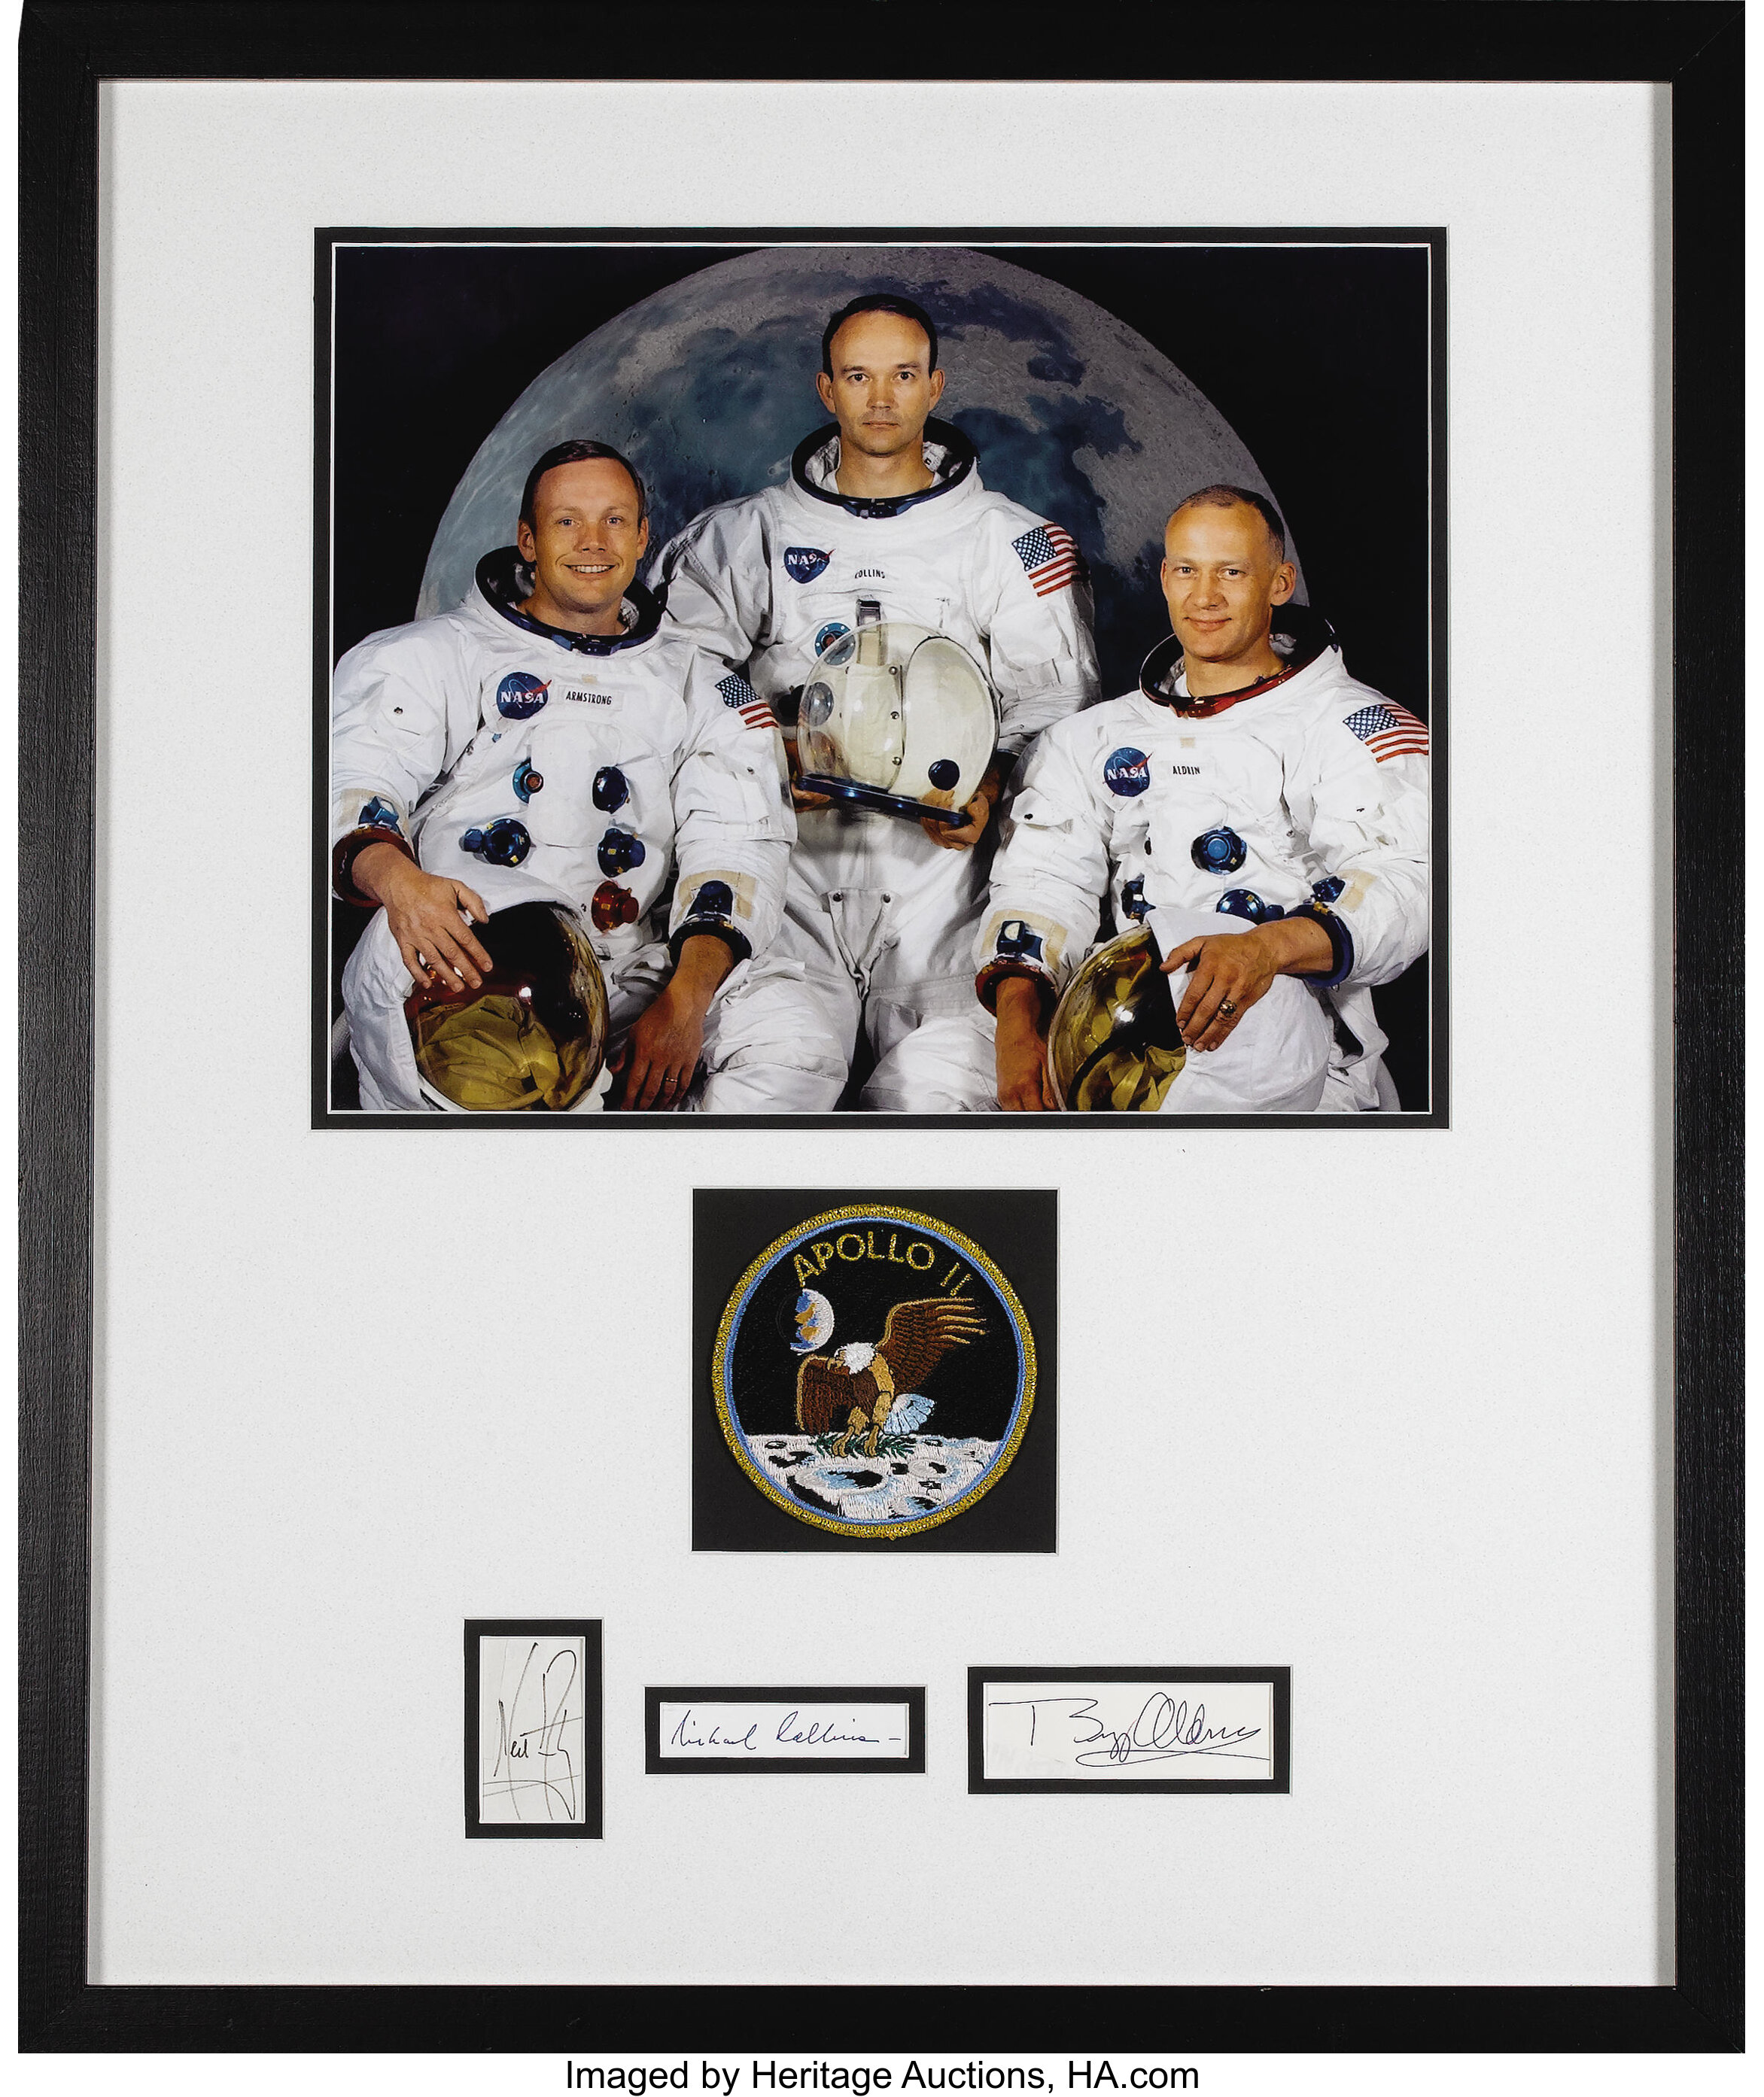 Sold at Auction: Apollo Mission Framed Patch Display